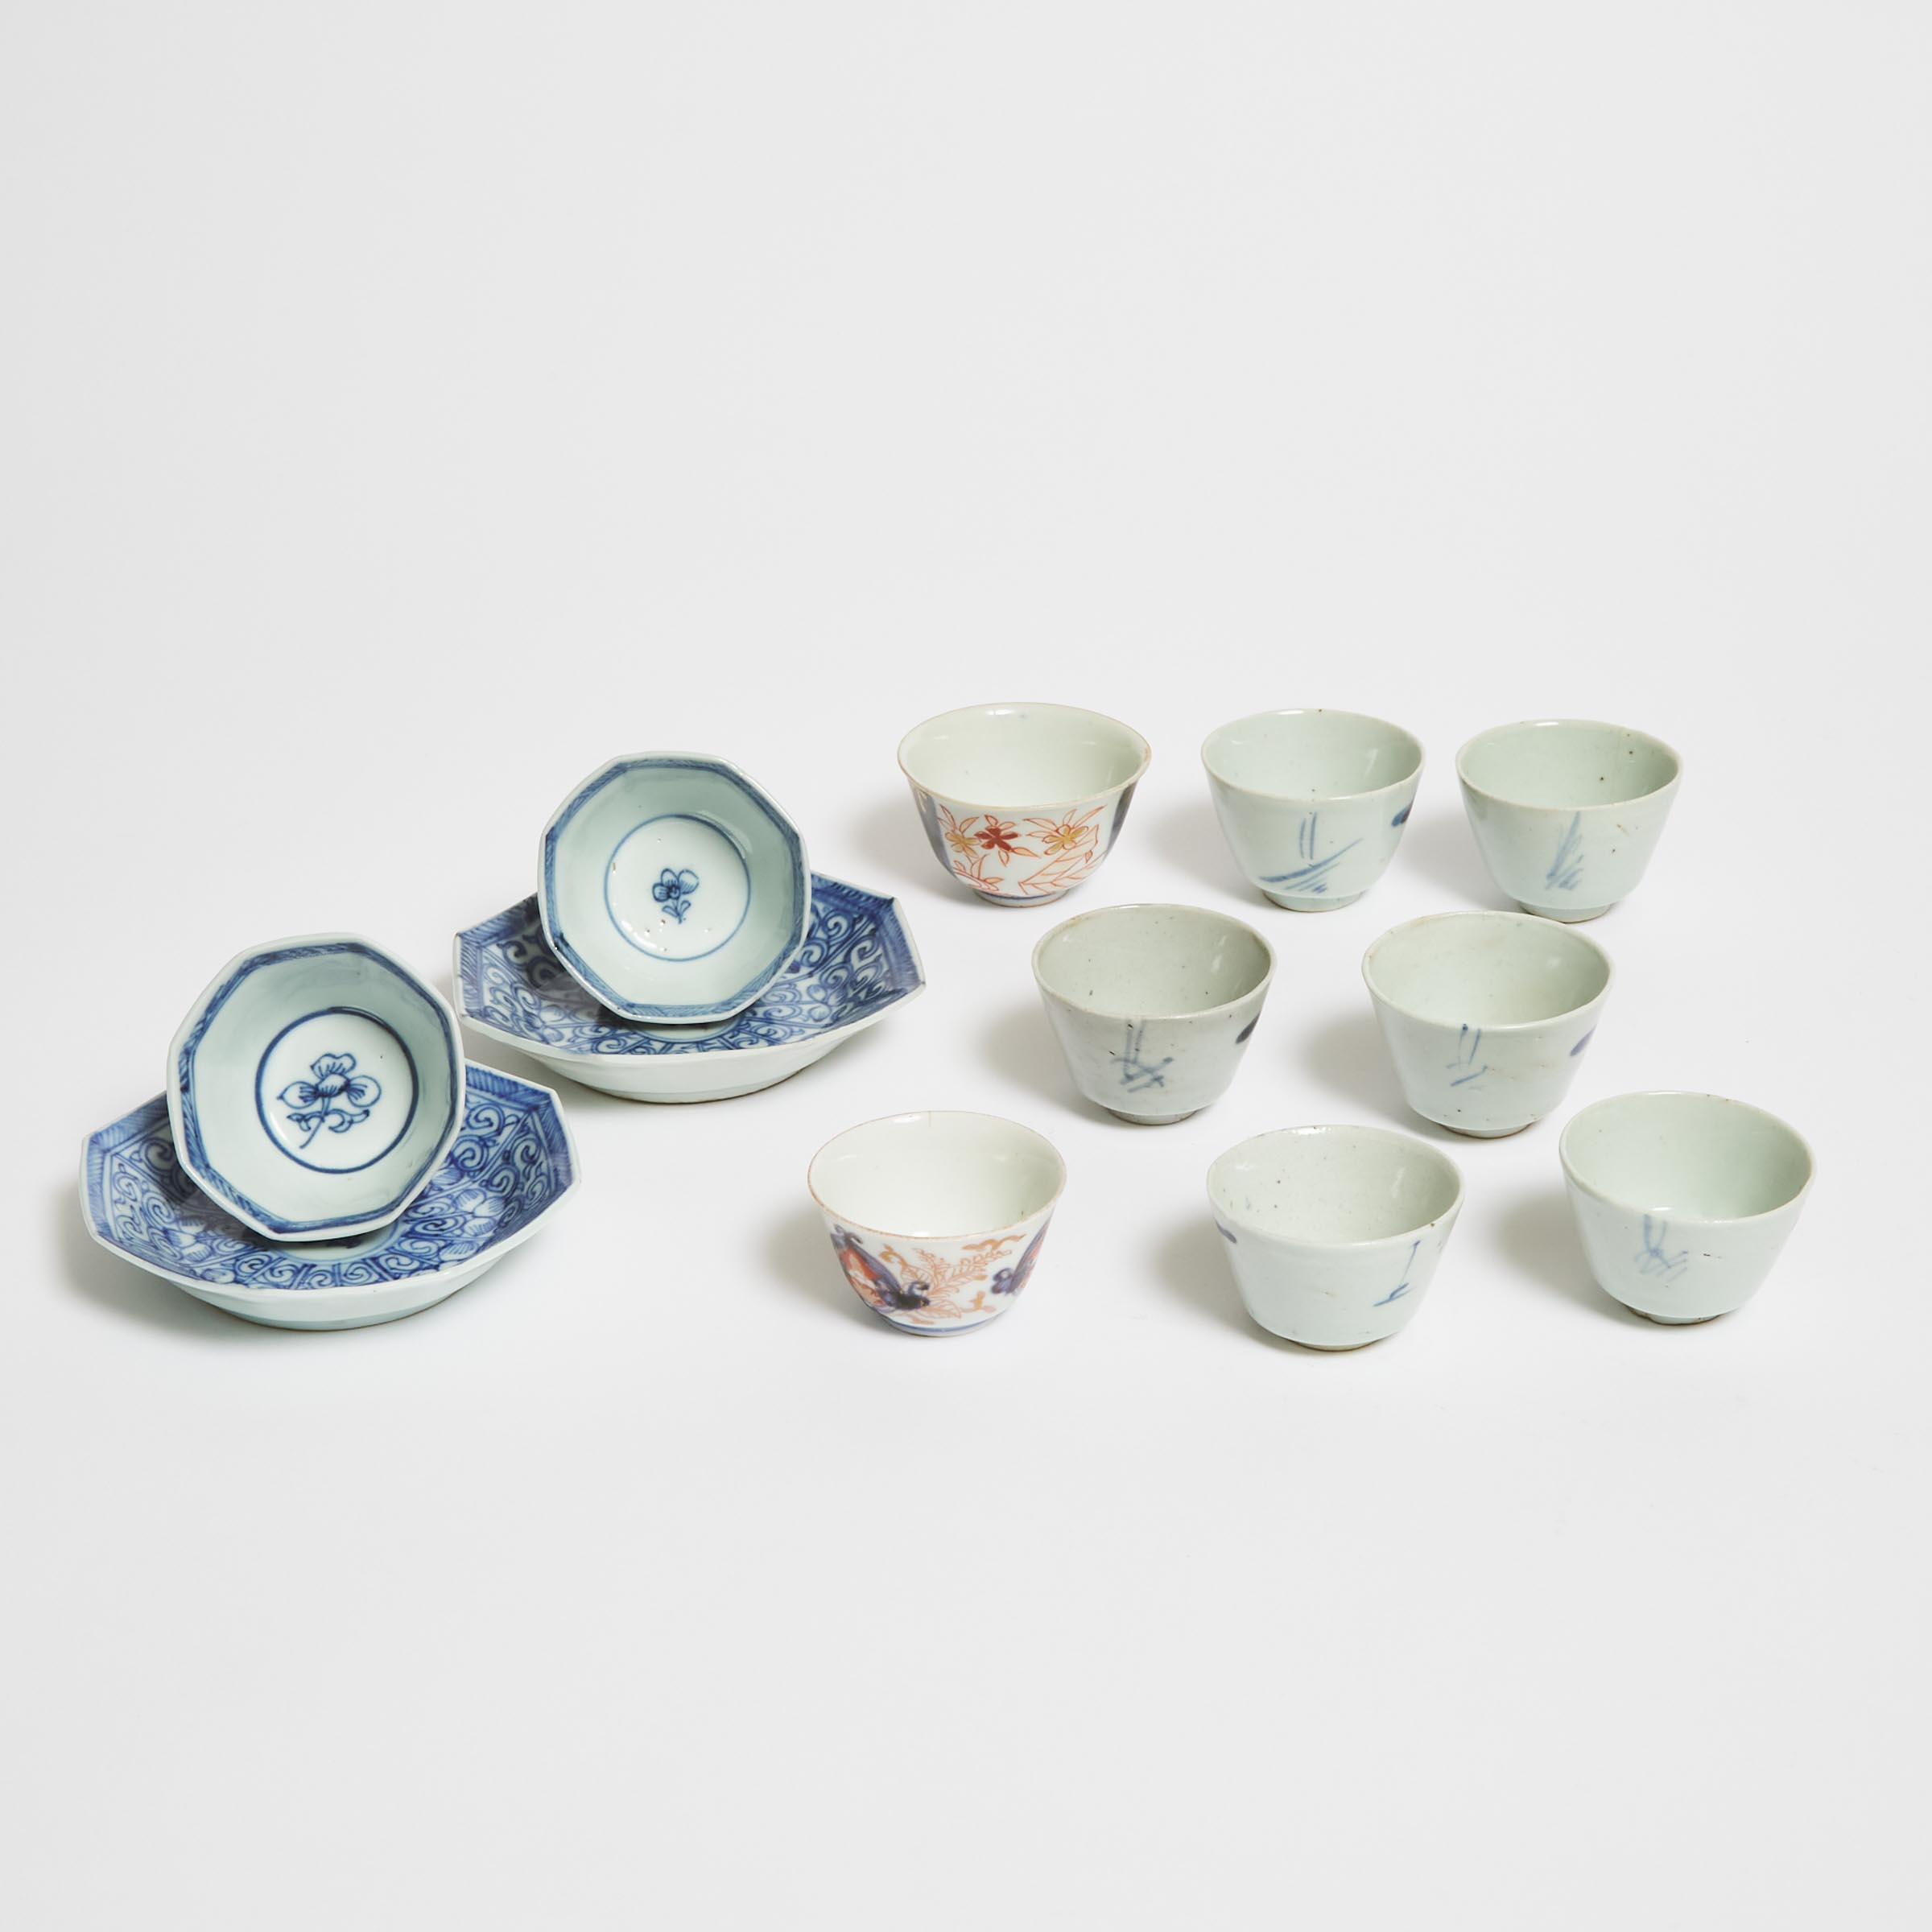 Two Sets of Blue and White Cups and Saucers, Together With Six Cups and Two Chinese Imari Cups, Kangxi Period (1662-1722)